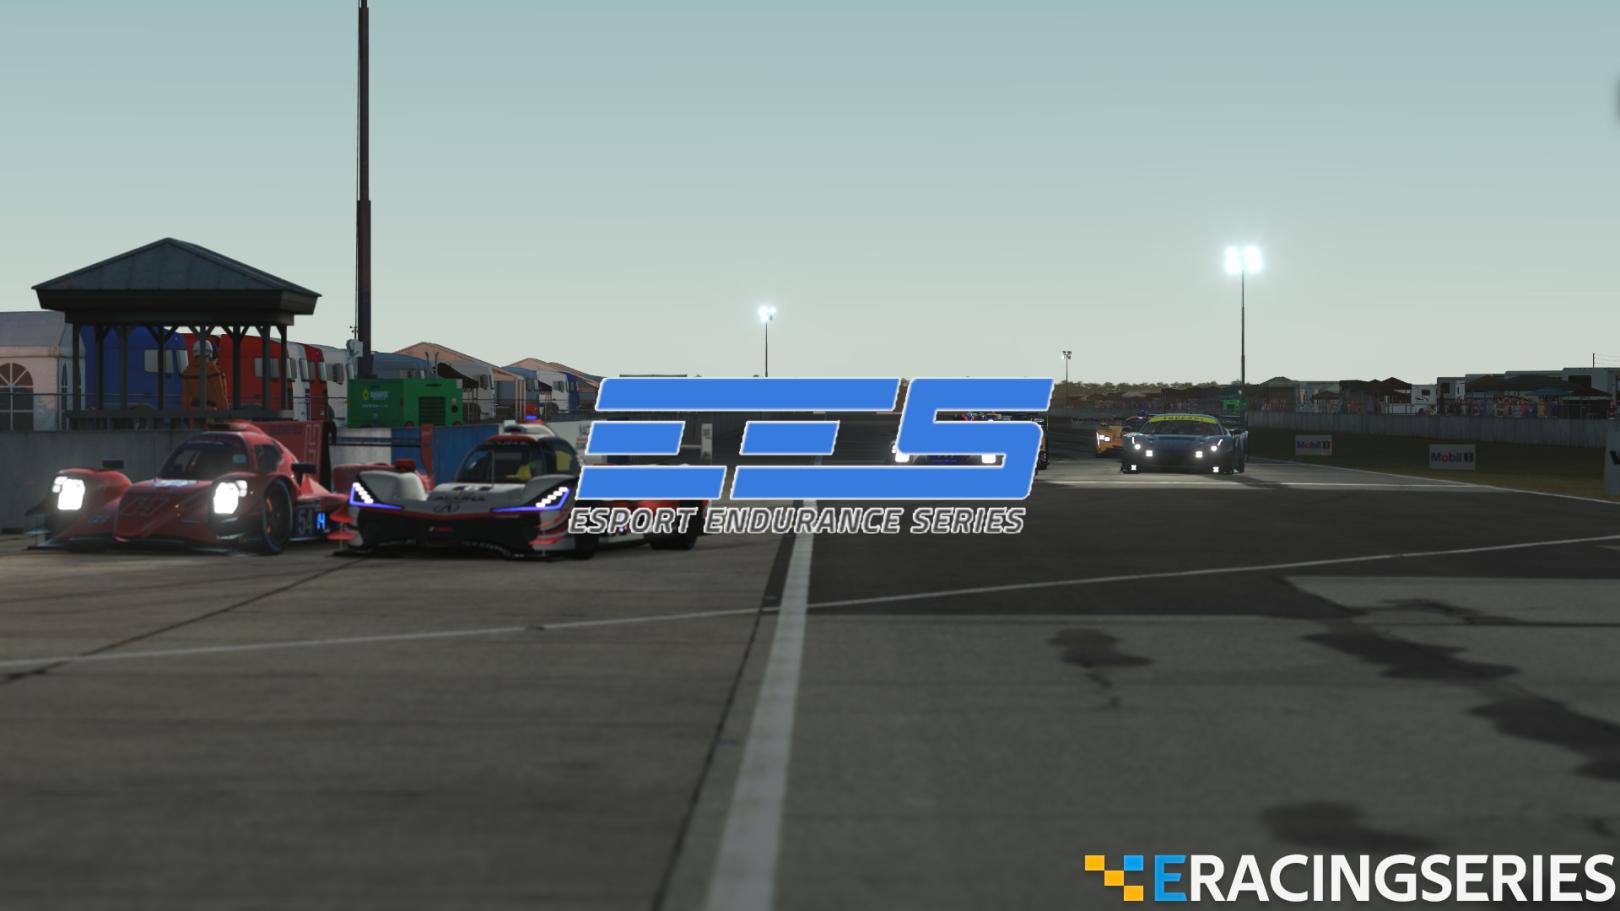 More information about "rFactor 2 Esport Endurance Series by E-Racing Series [19 Dicembre ore 16]"